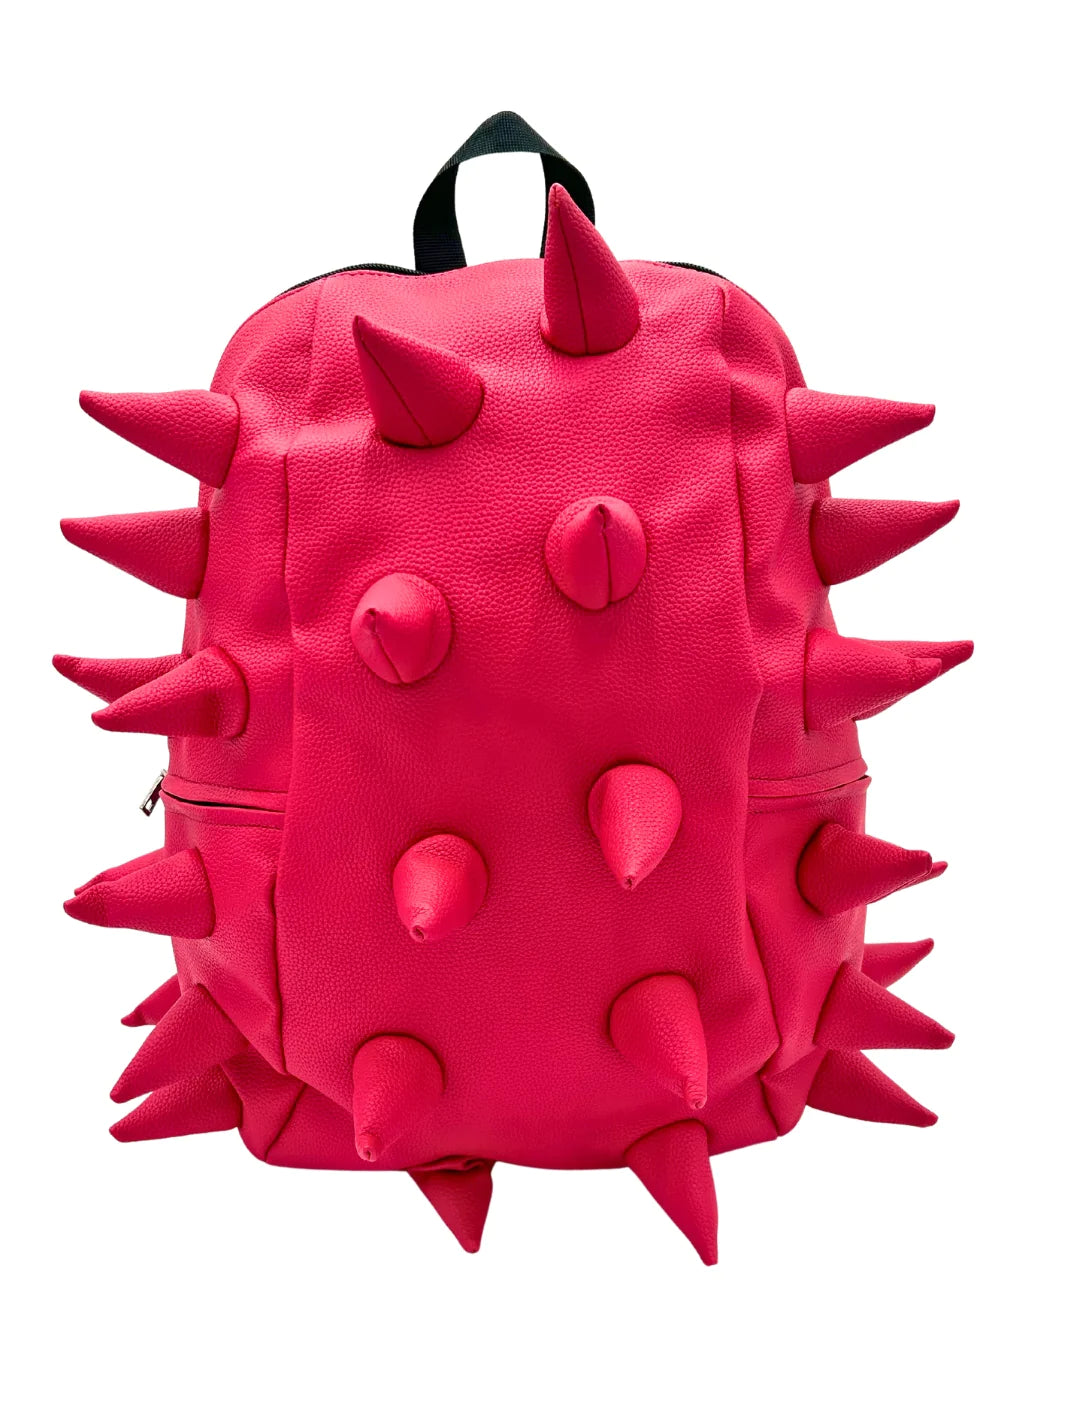 Madpax Spike - Think Pink Backpack